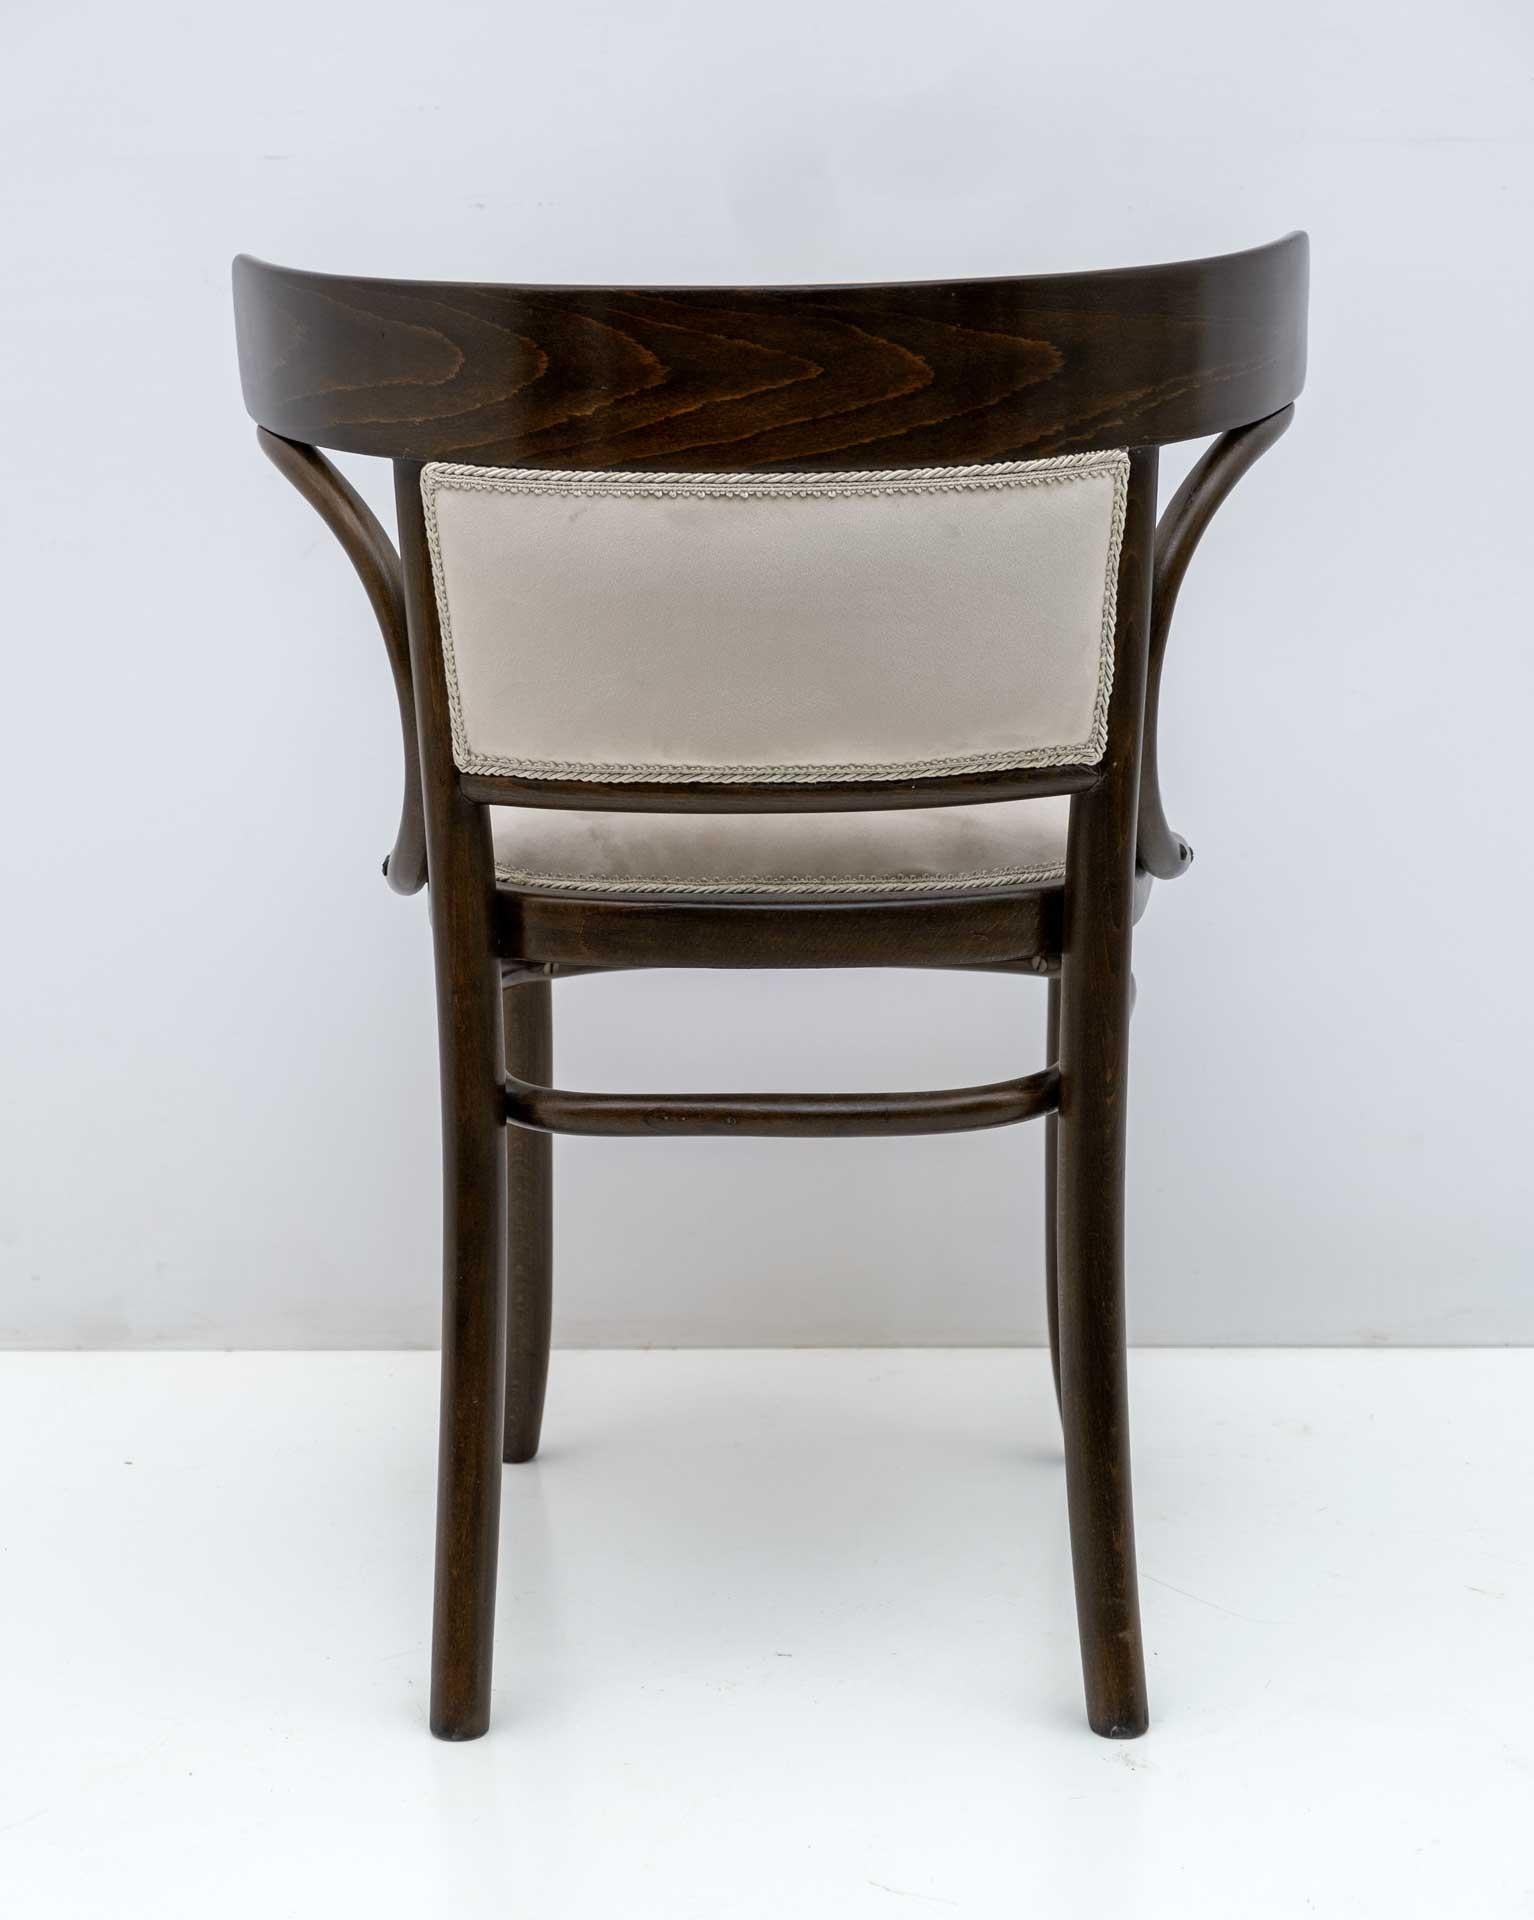 Thonet Austrian Curved Wood Armrests Chair, 1920s For Sale 1